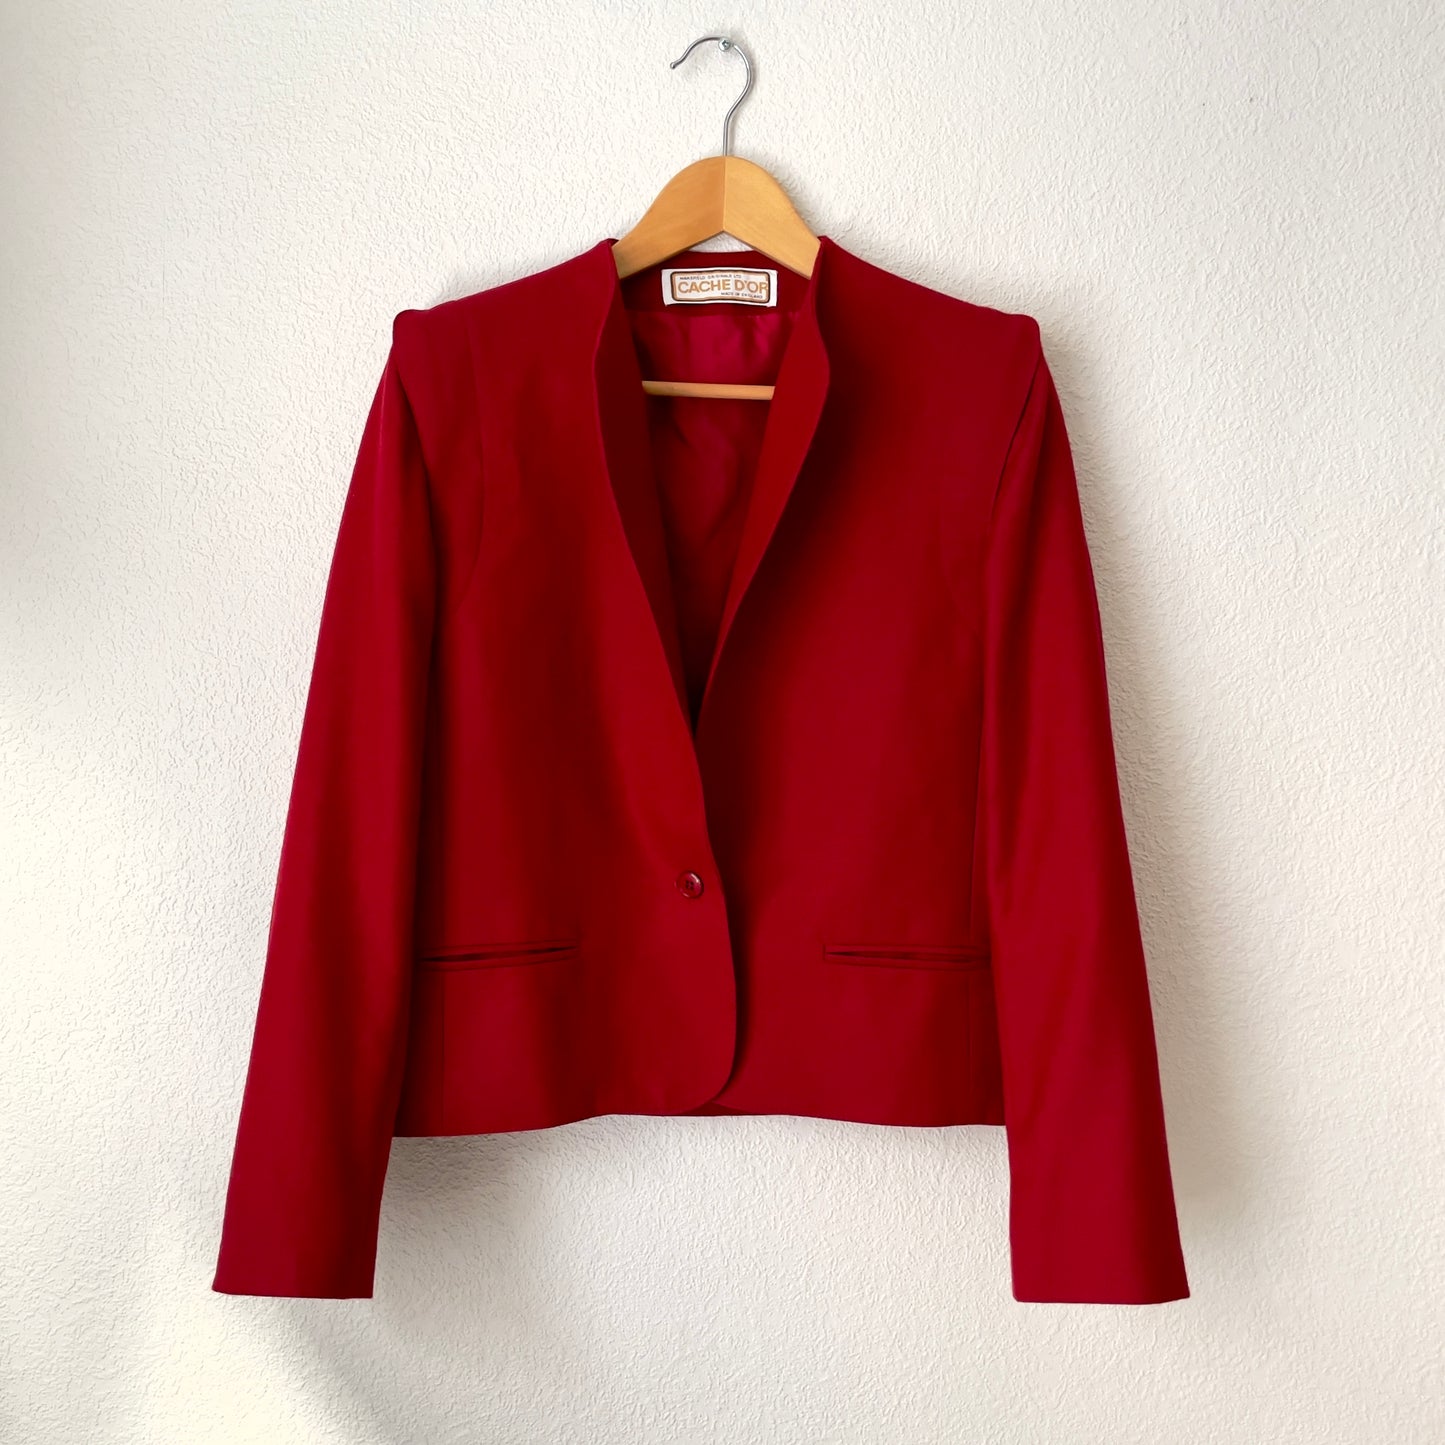 Vintage Red Wool Jacket - Cache d’or